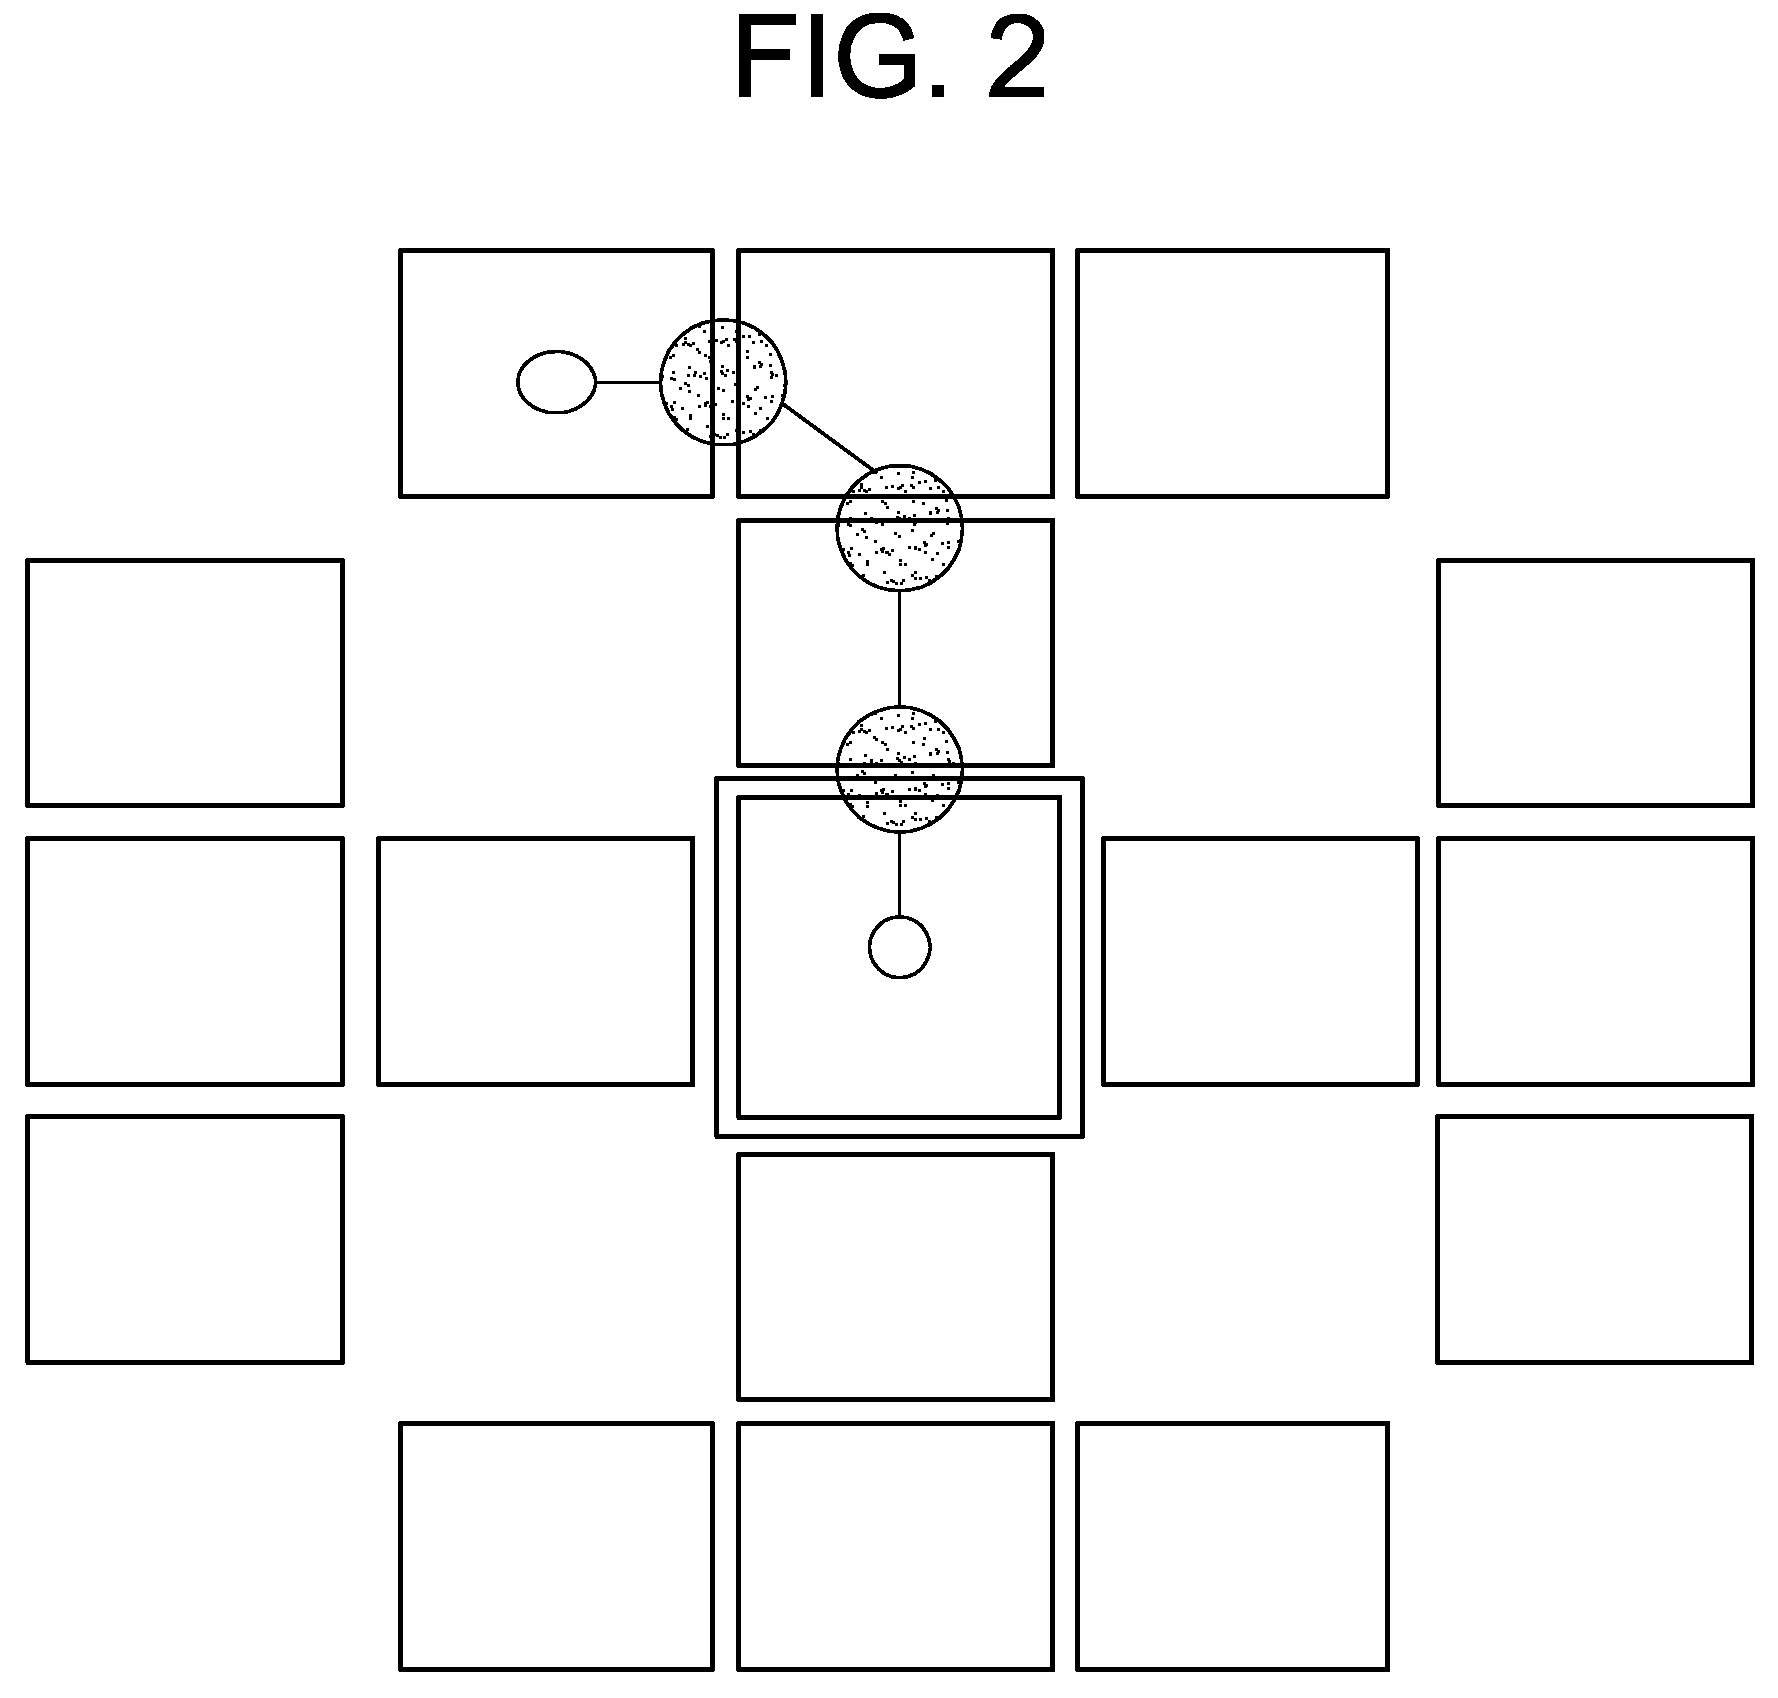 Intelligent user interface using on-screen force feedback and method of use